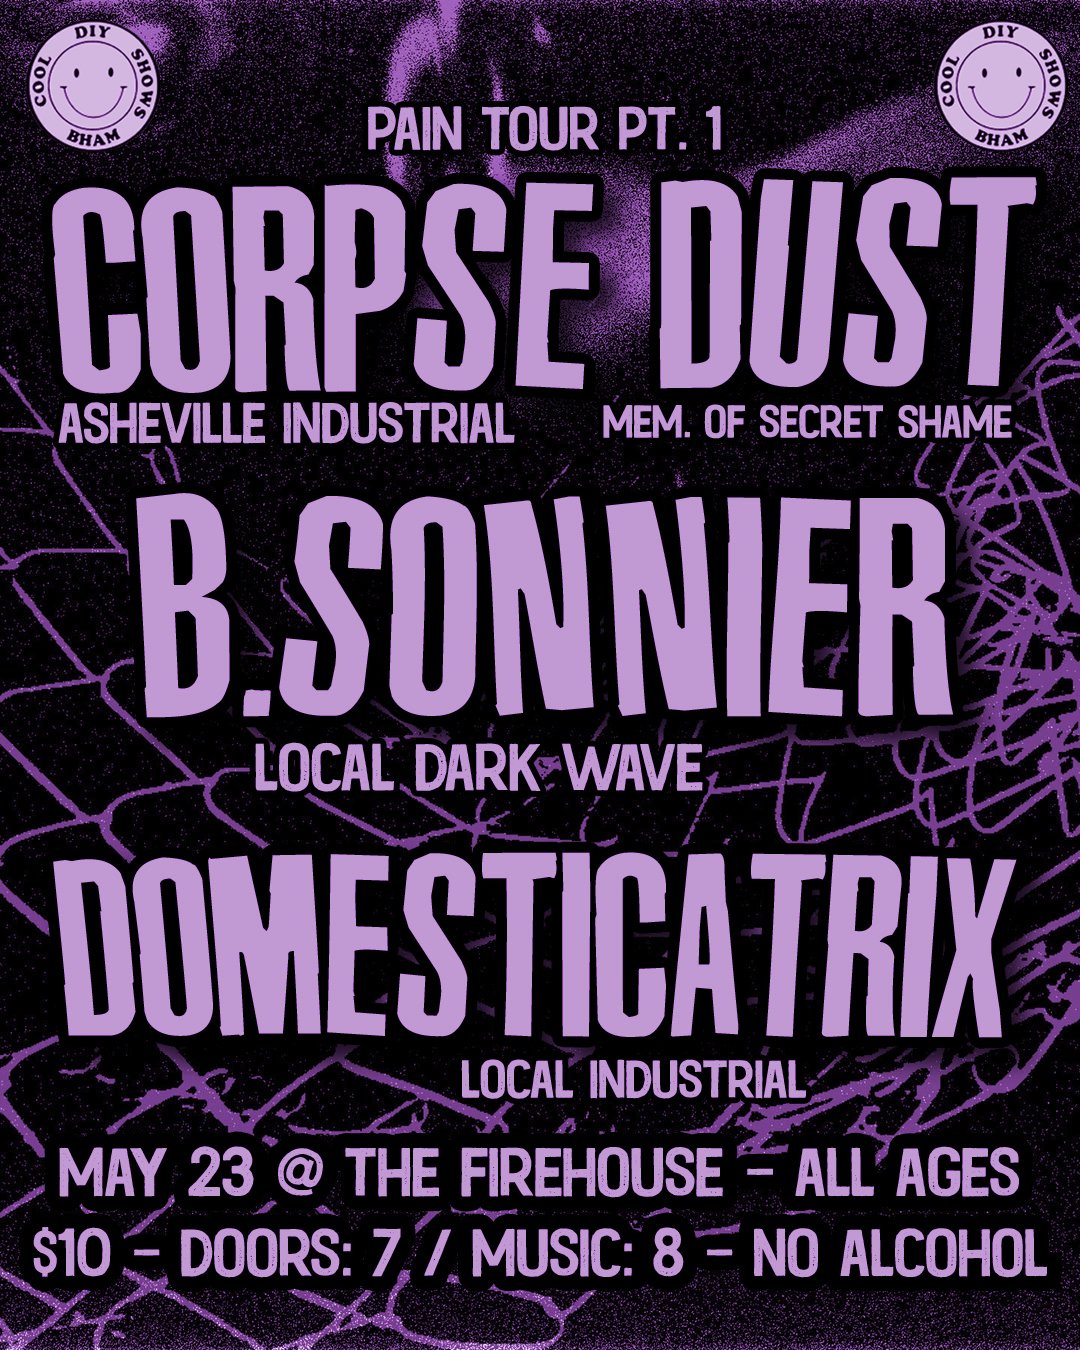 ⛓️ Corpse Dust is gracing us with his anguished noise, on tour from Asheville. Many may recognize Corpse Dust from his recent visits to Birmingham, performing with Secret Shame on drums.

🌑 Locals - B.Sonnier, and Domesticatrix are gonna make sure w